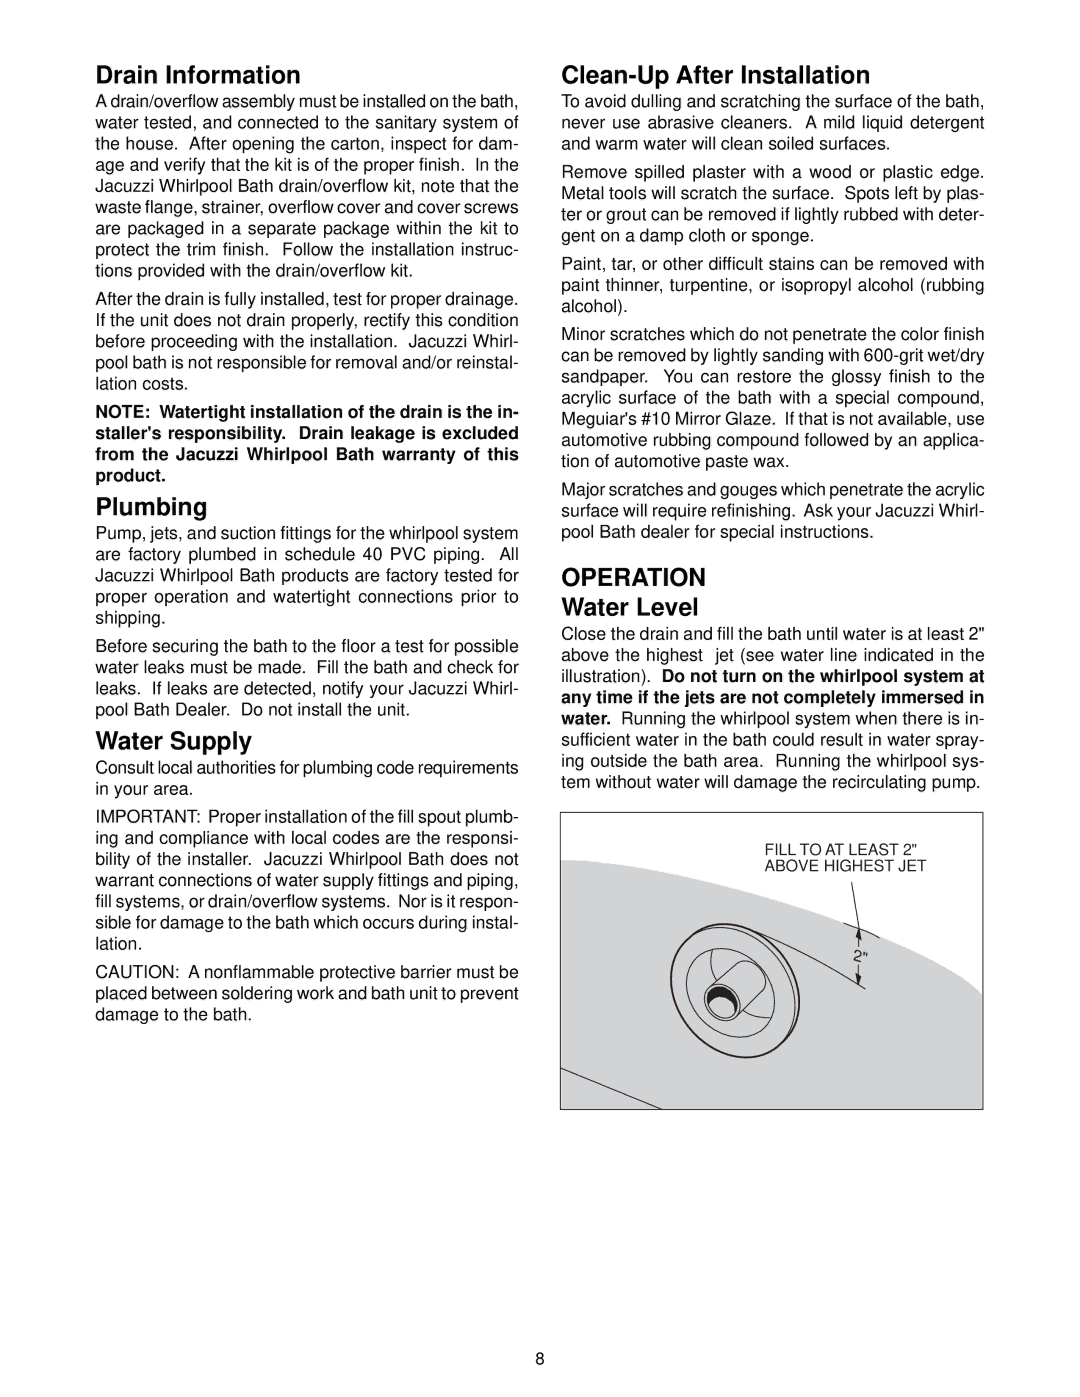 Jacuzzi S198 owner manual Drain Information, Plumbing, Water Supply, Clean-Up After Installation, Water Level 